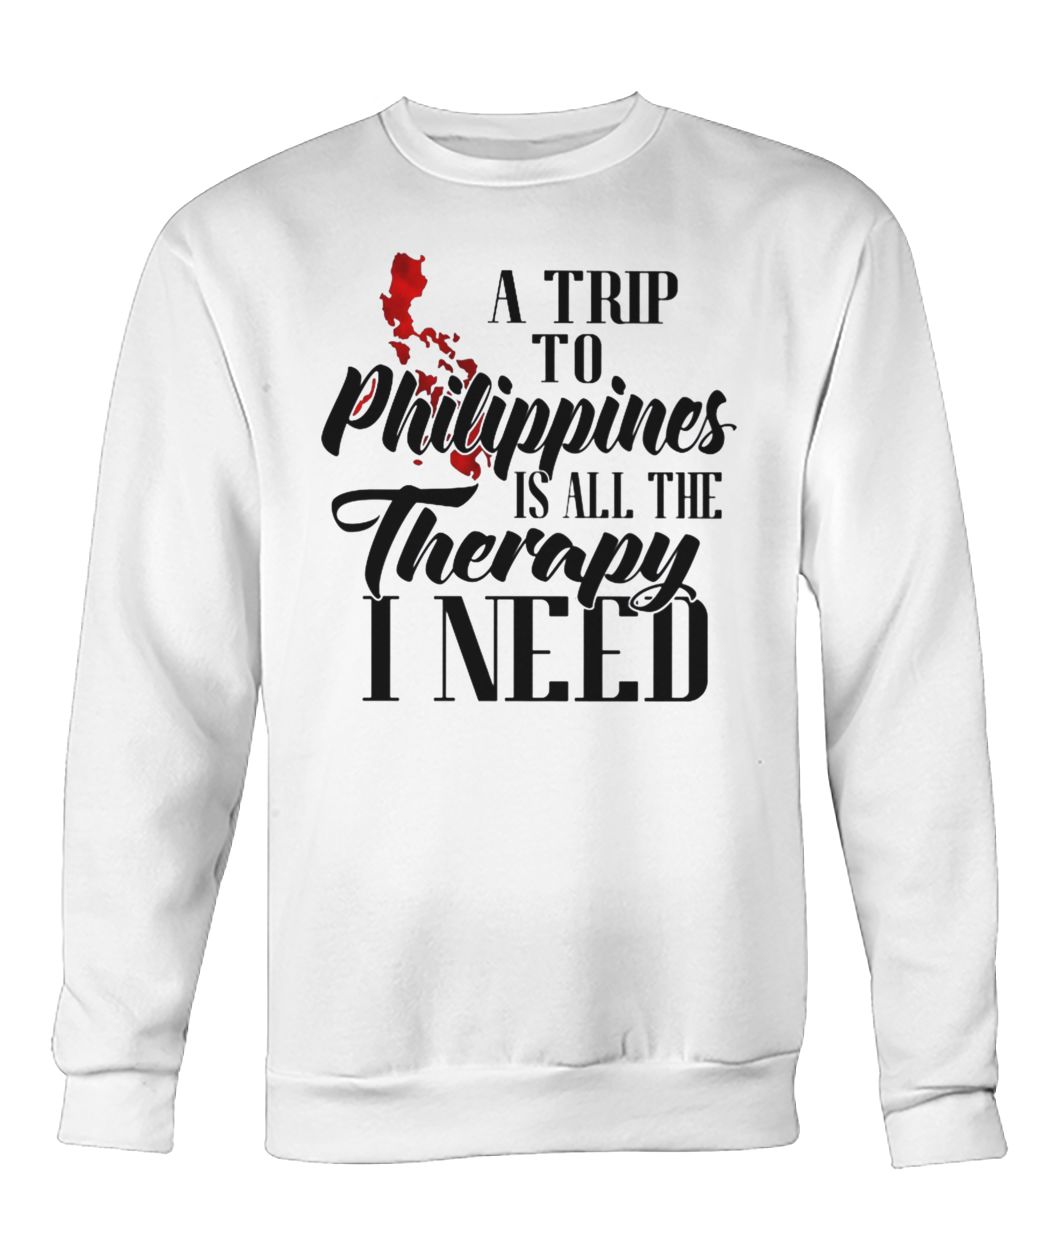 A trip to philippines all the therapy I need crew neck sweatshirt